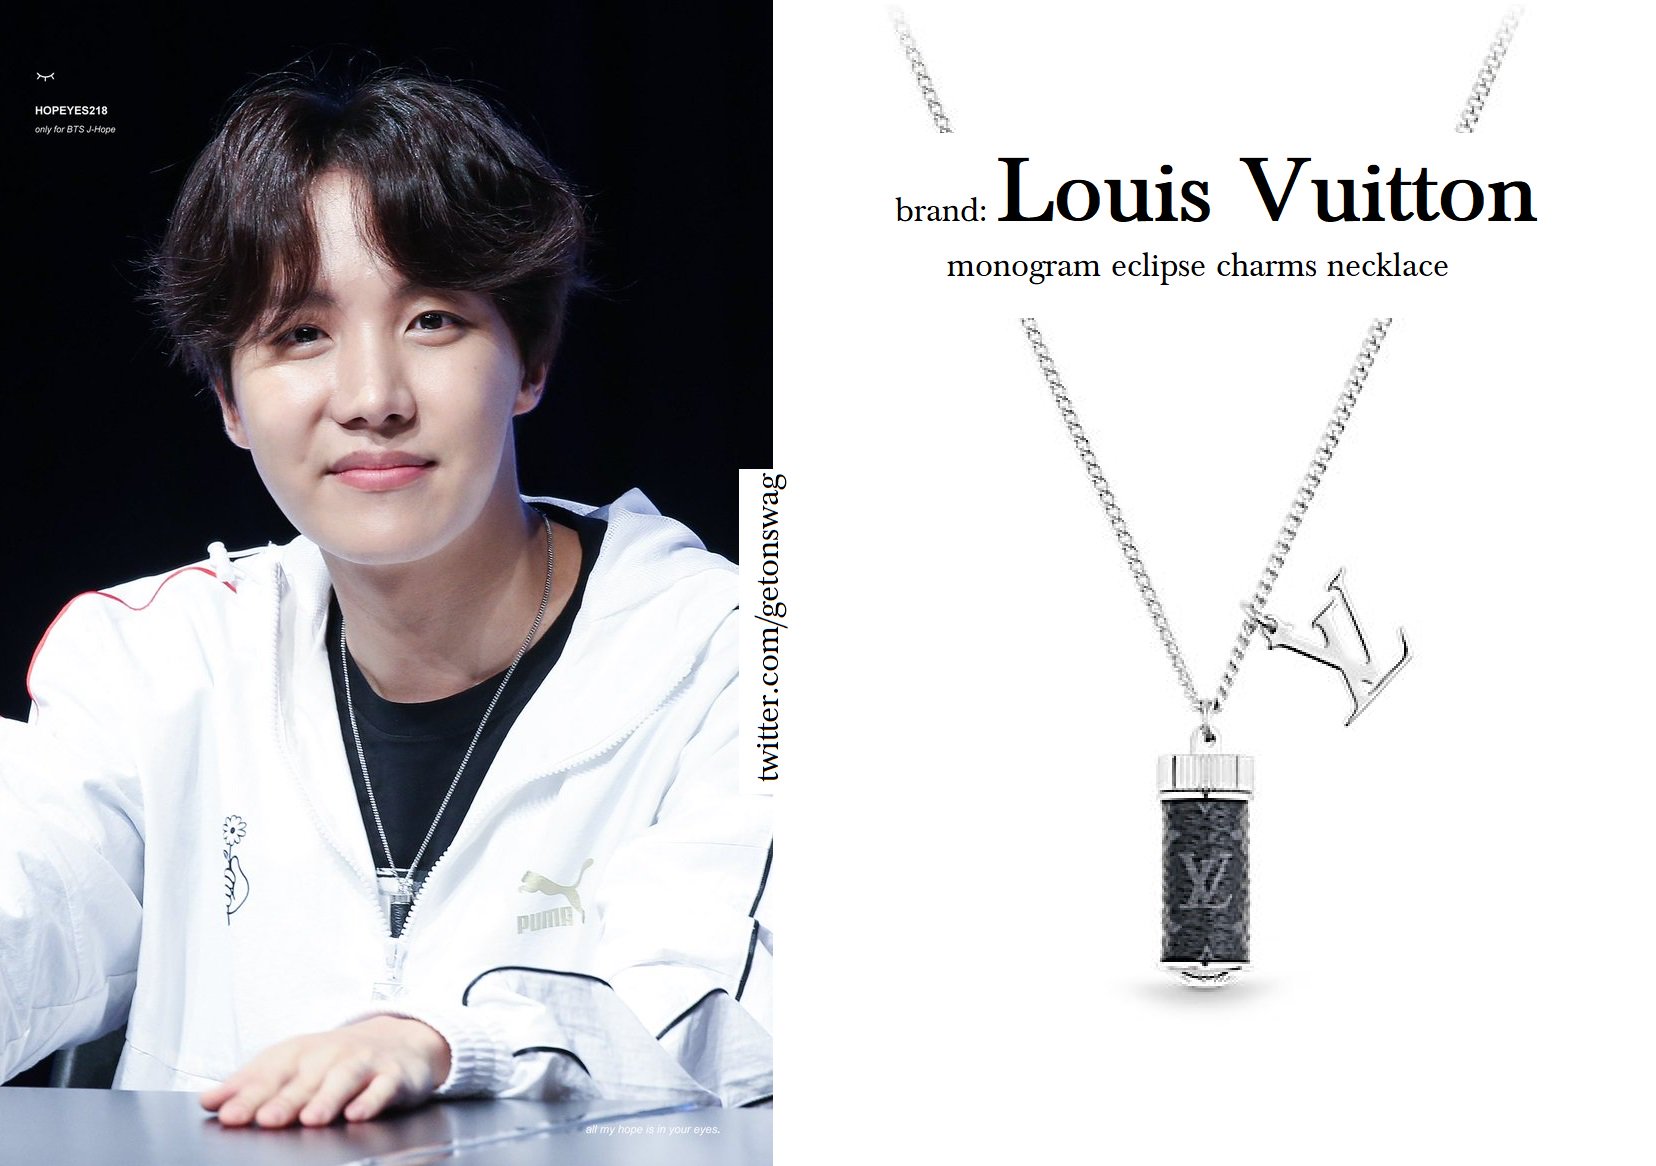 Beyond The Style ✼ Alex ✼ on X: J-HOPE #BTS 180408 #JHOPE #제이홉 #방탄소년단  LOUIS VUITTON monogram eclipse charms necklace, approx.515 usd 🎁 from  HOPEYES218  / X